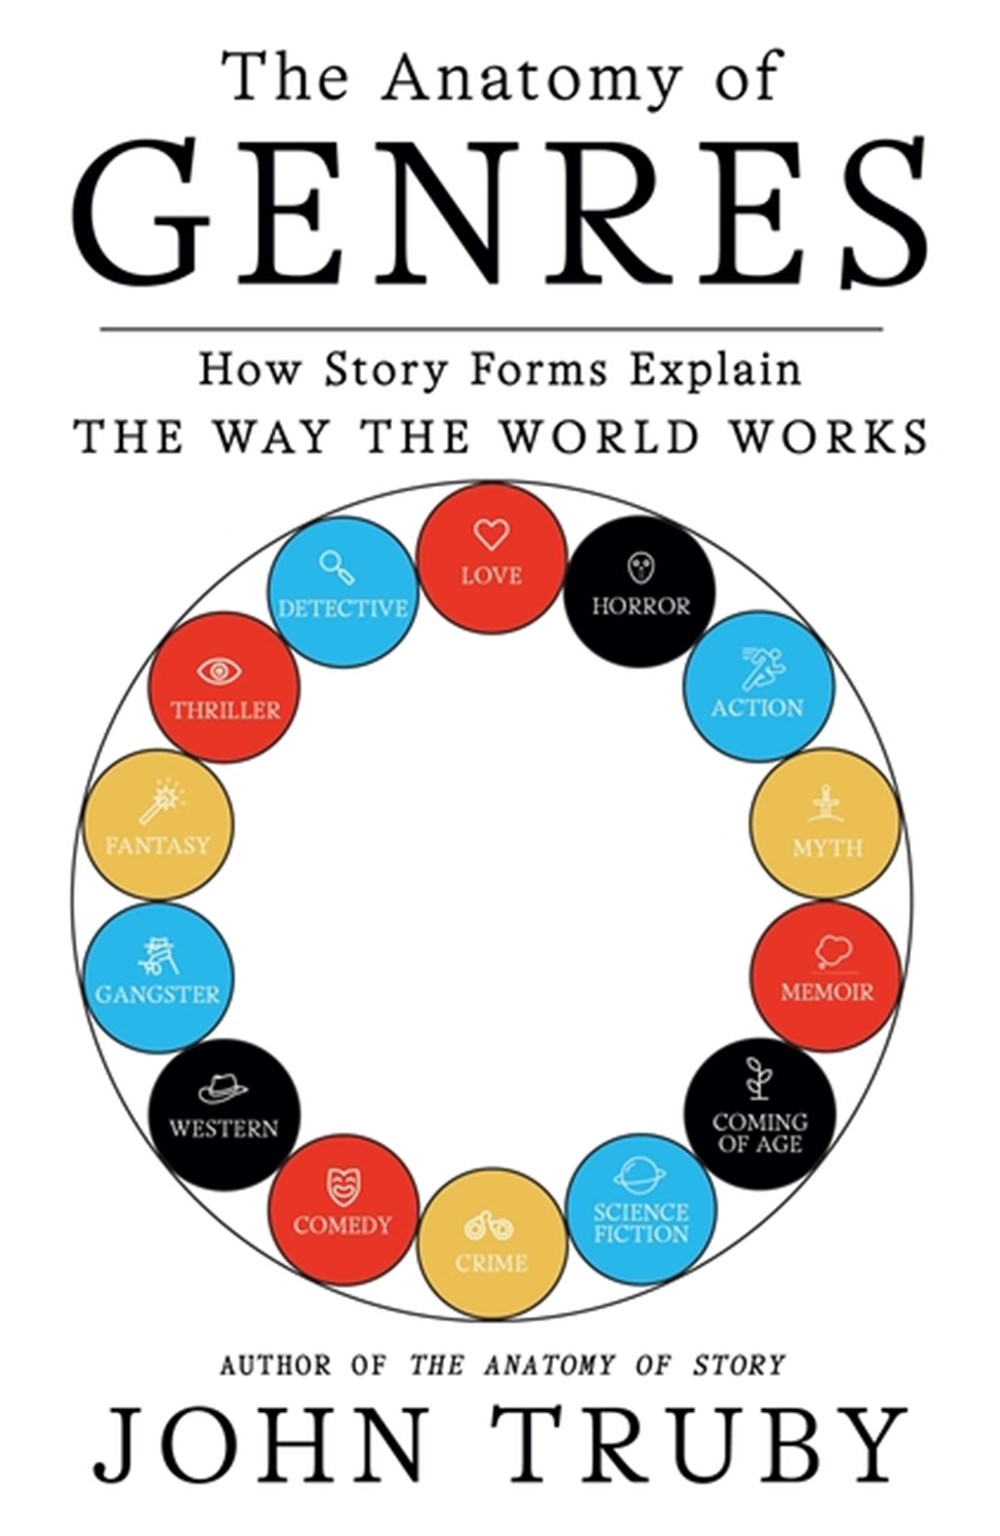 Anatomy of Genres: How Story Forms Explain the Way the World Works